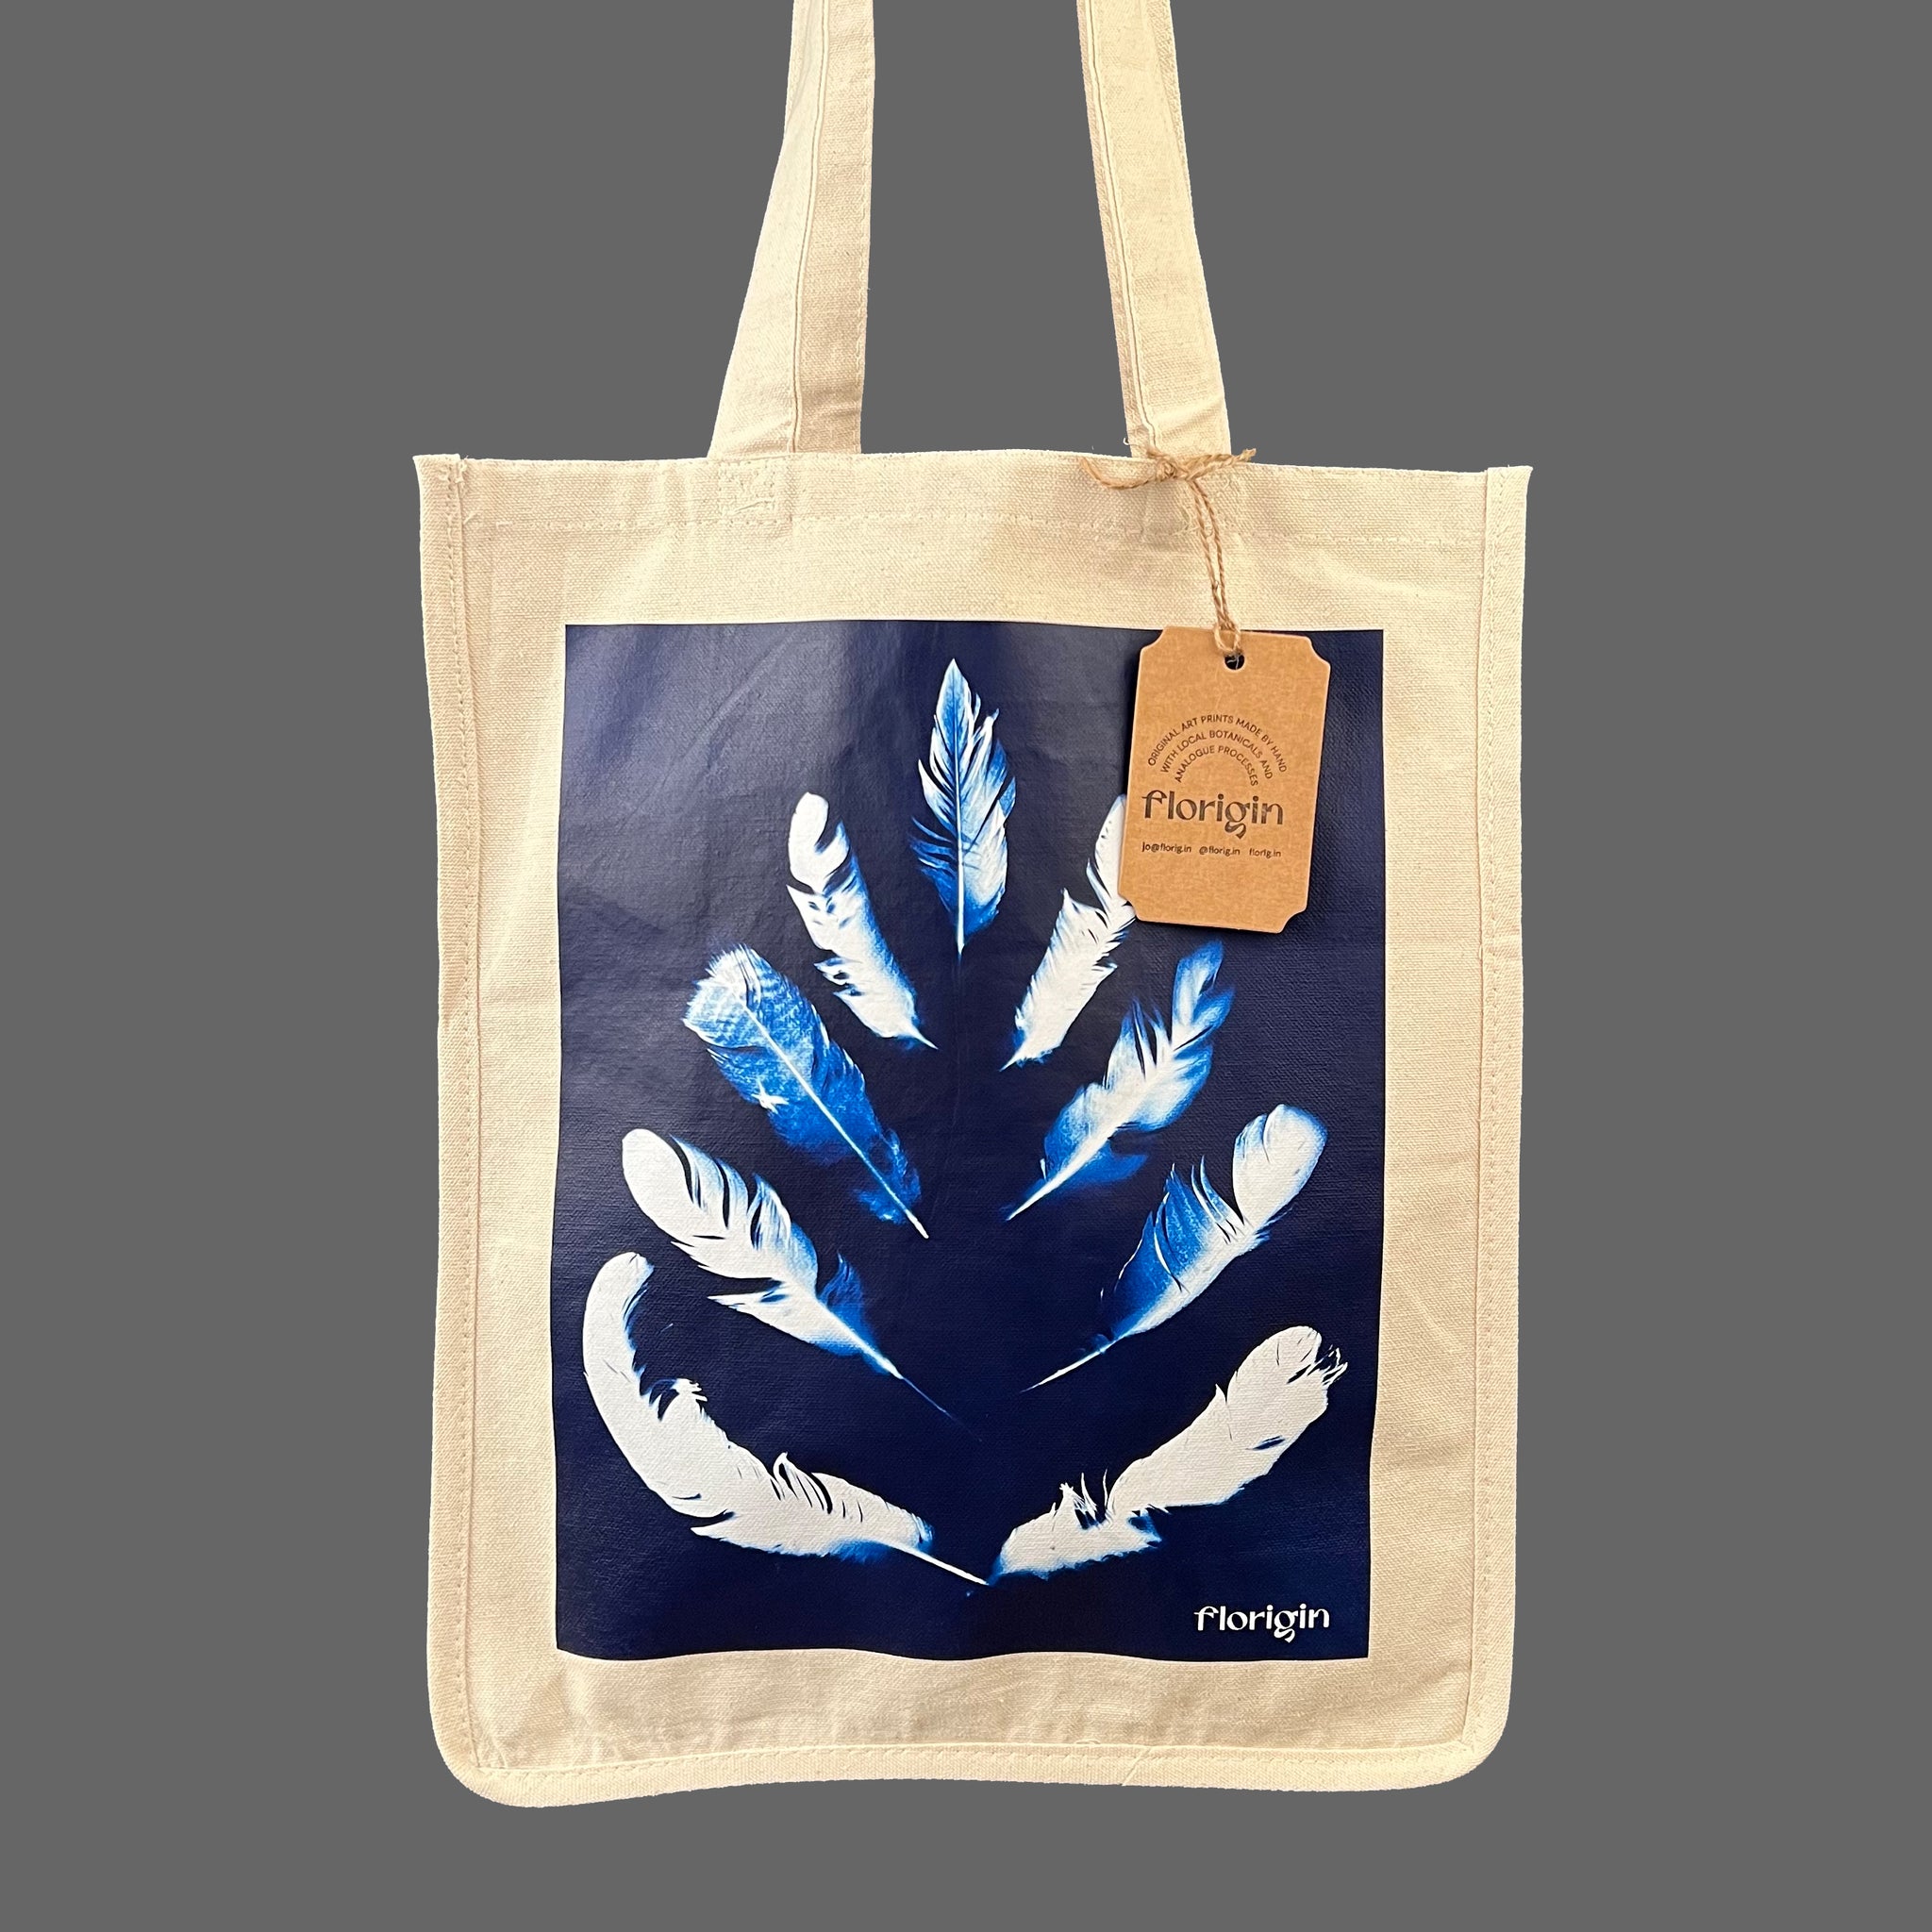 Canvas Tote Shopper with blue image of feathers in a pinocle design sold in the florig.in store